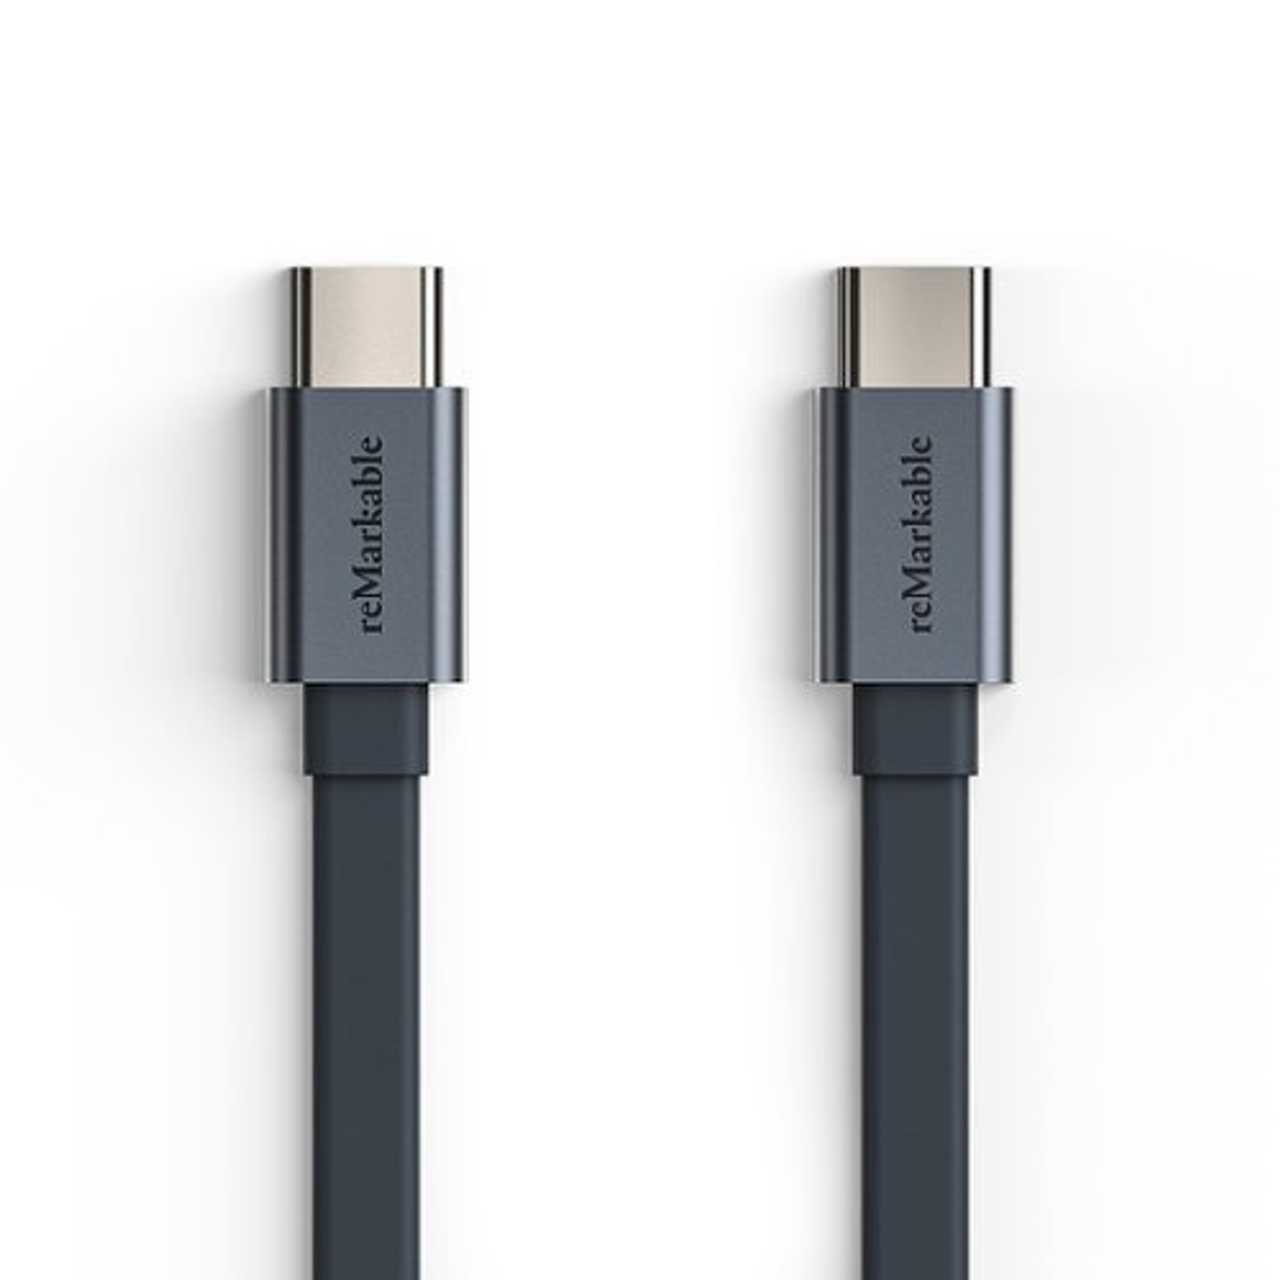 reMarkable - 3' USB-C to Type-C cable for reMarkable2 - Gray